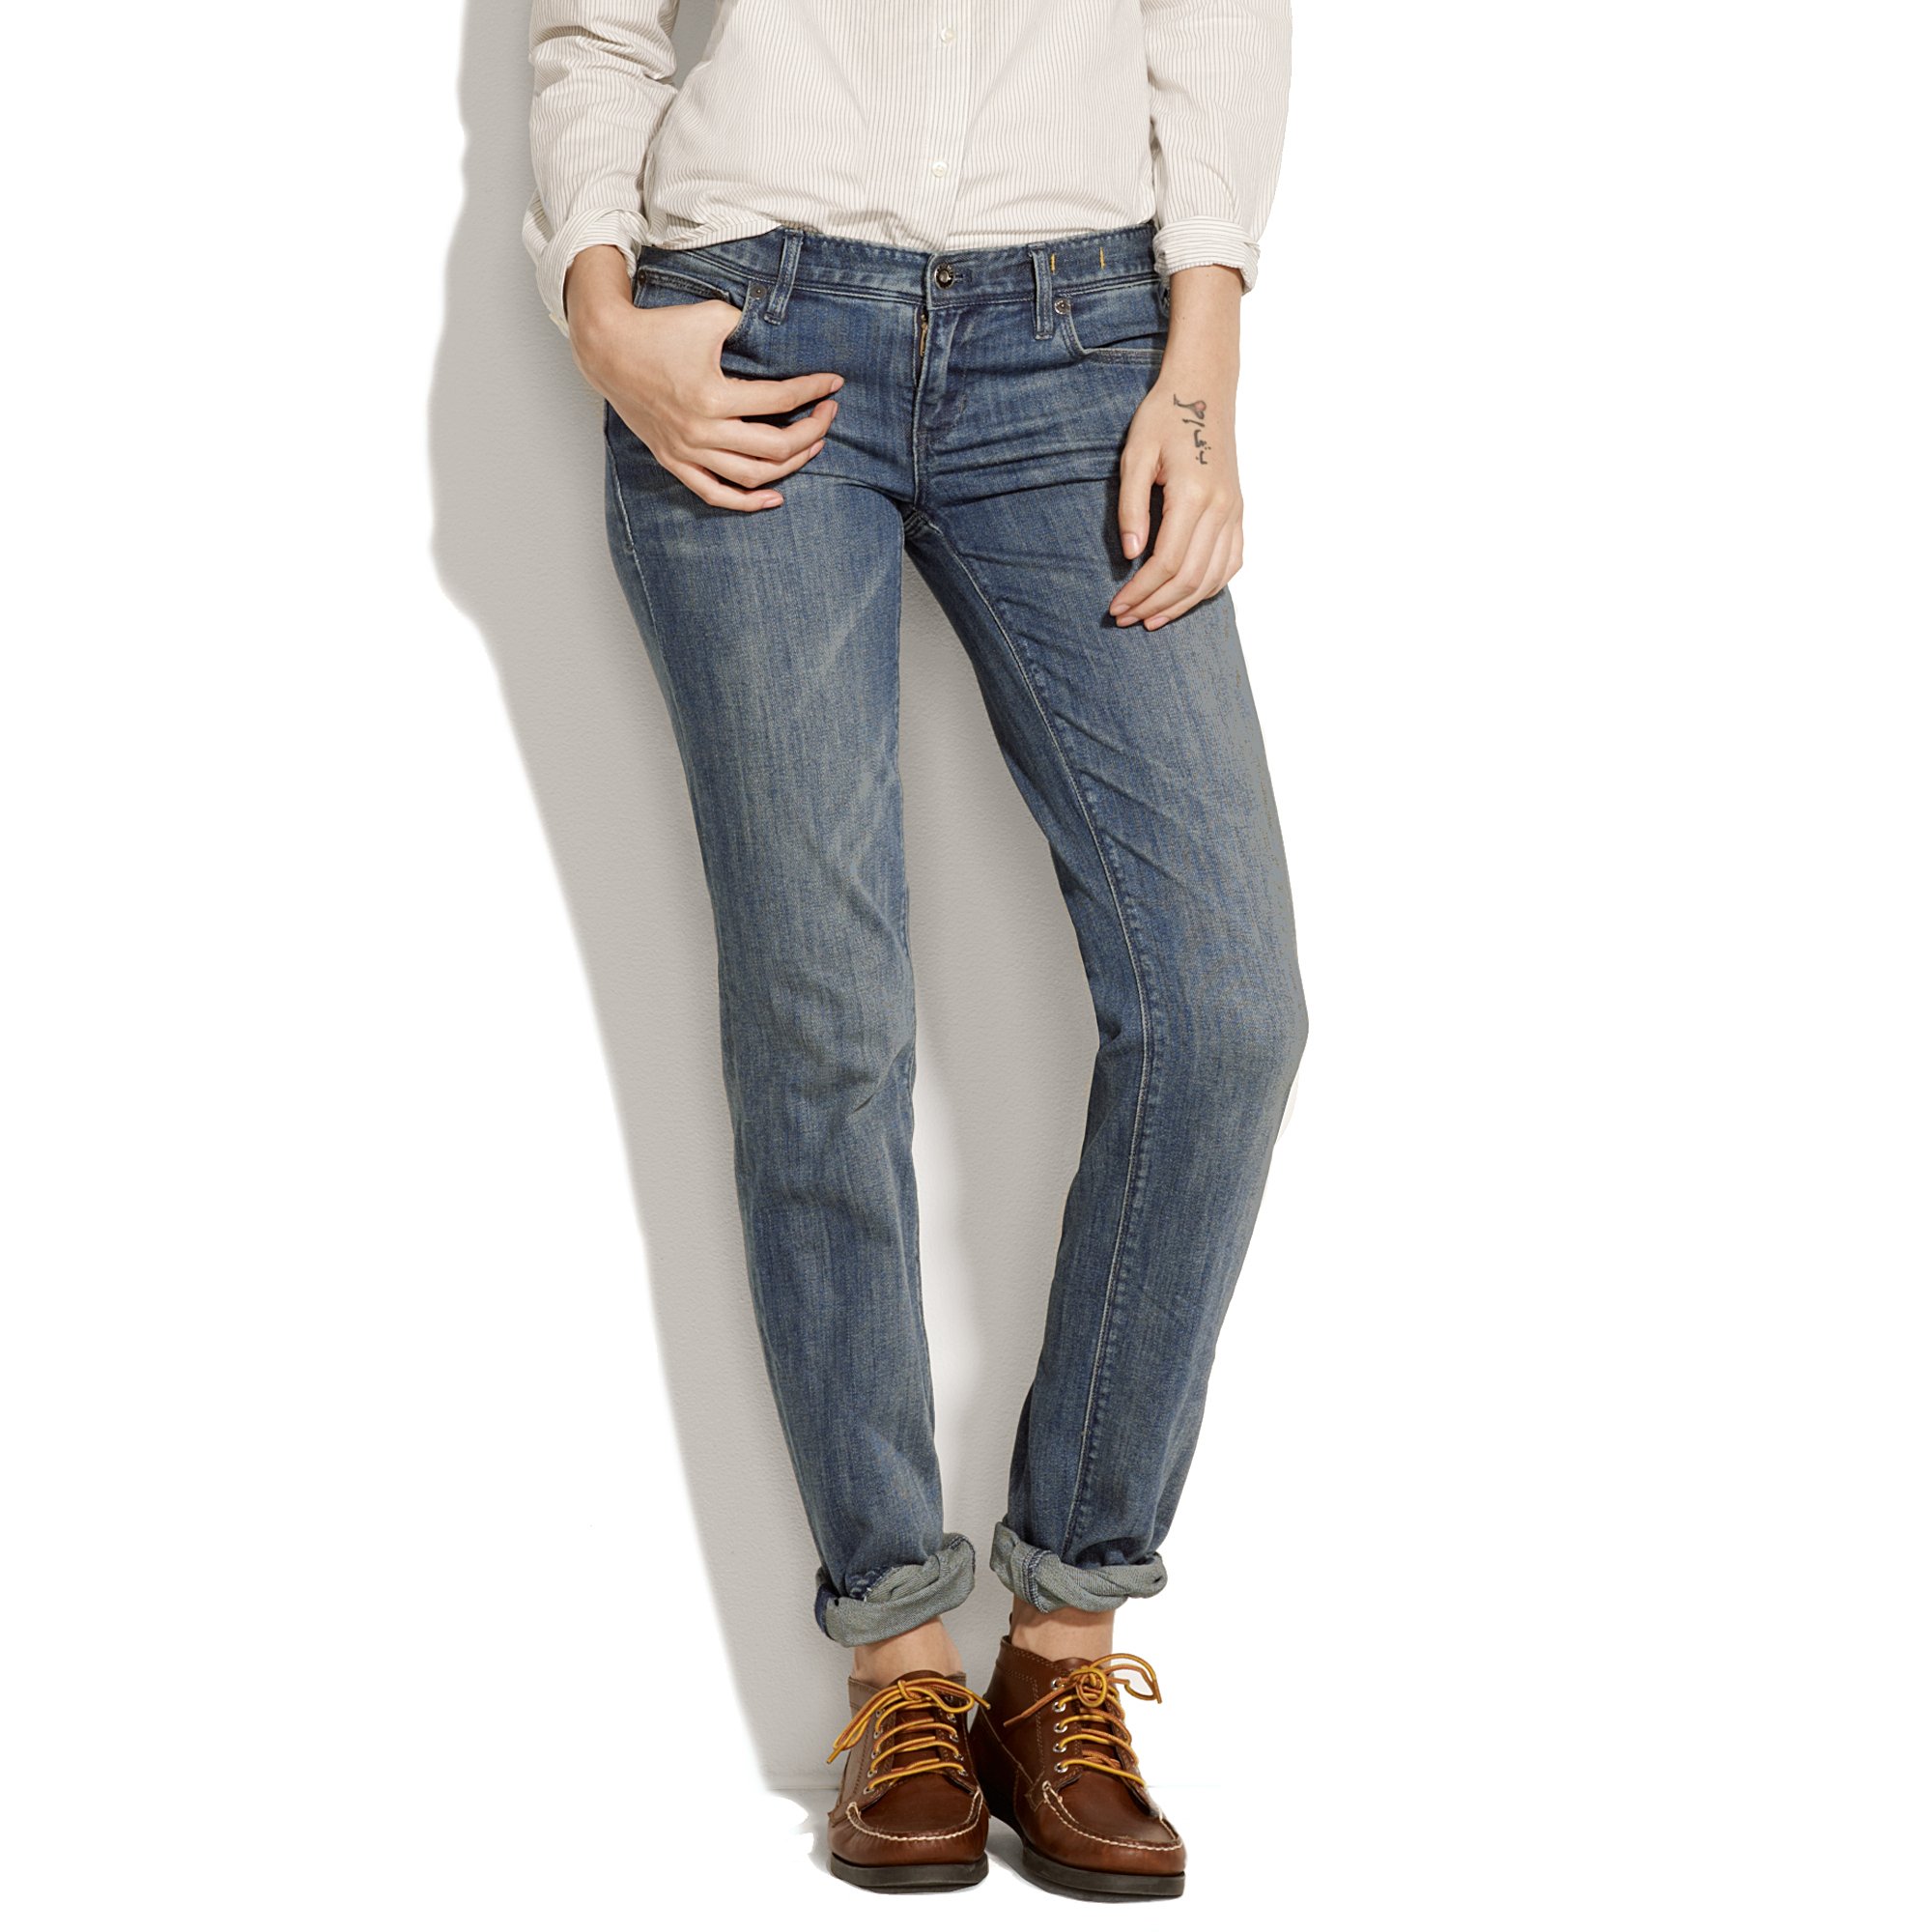 Lyst - Madewell Rail Straight Jeans in Eastern Wash in Blue